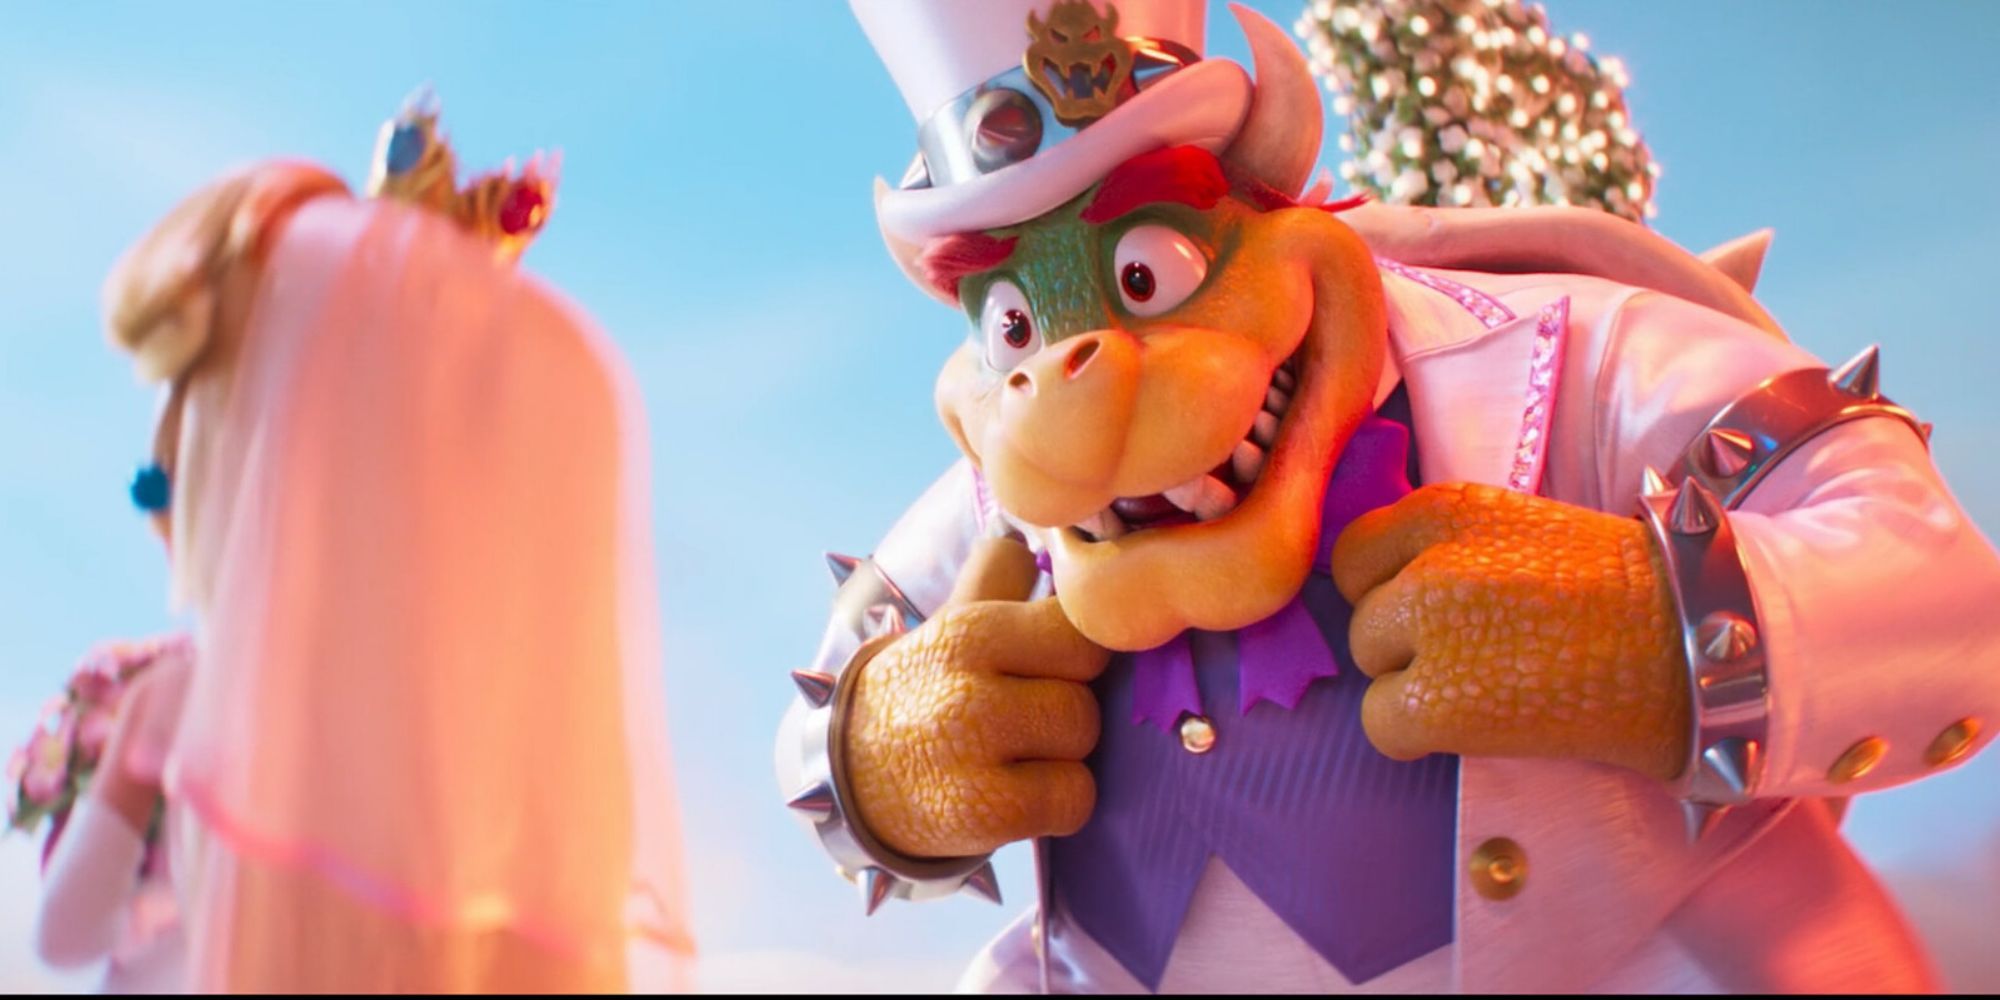 Bowser (Jack Black) looking sharp for his wedding with Peaches (Anya Taylor-Joy), whose back is turned against Bowser in The Super Mario Bros. Movie